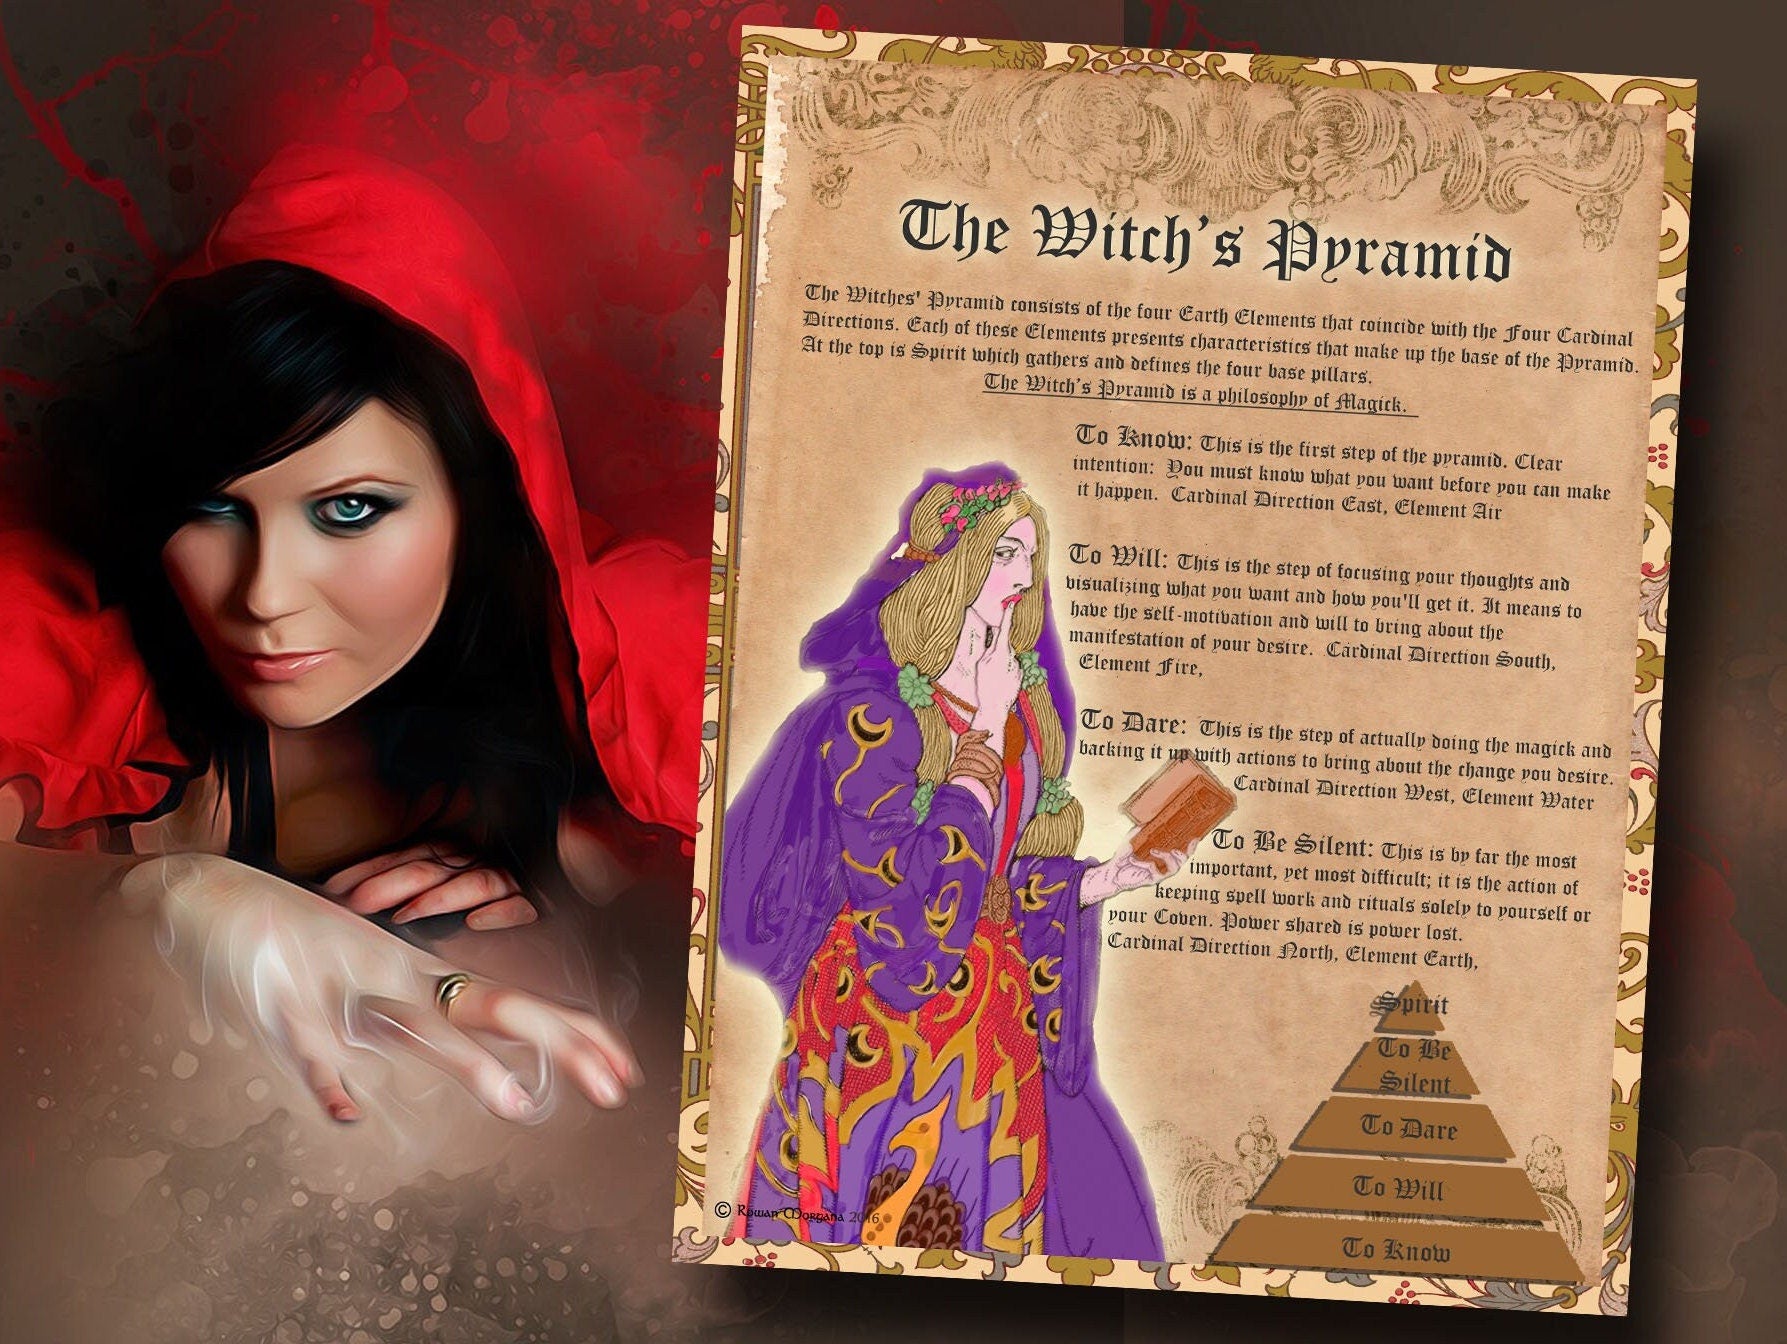 WITCHS PYRAMID, The Four Pillars of Witchcraft, Know Will Dare Keep Silent, Foundation of Magic and Casting Spells, Occult Ritual High Magic - Morgana Magick Spell